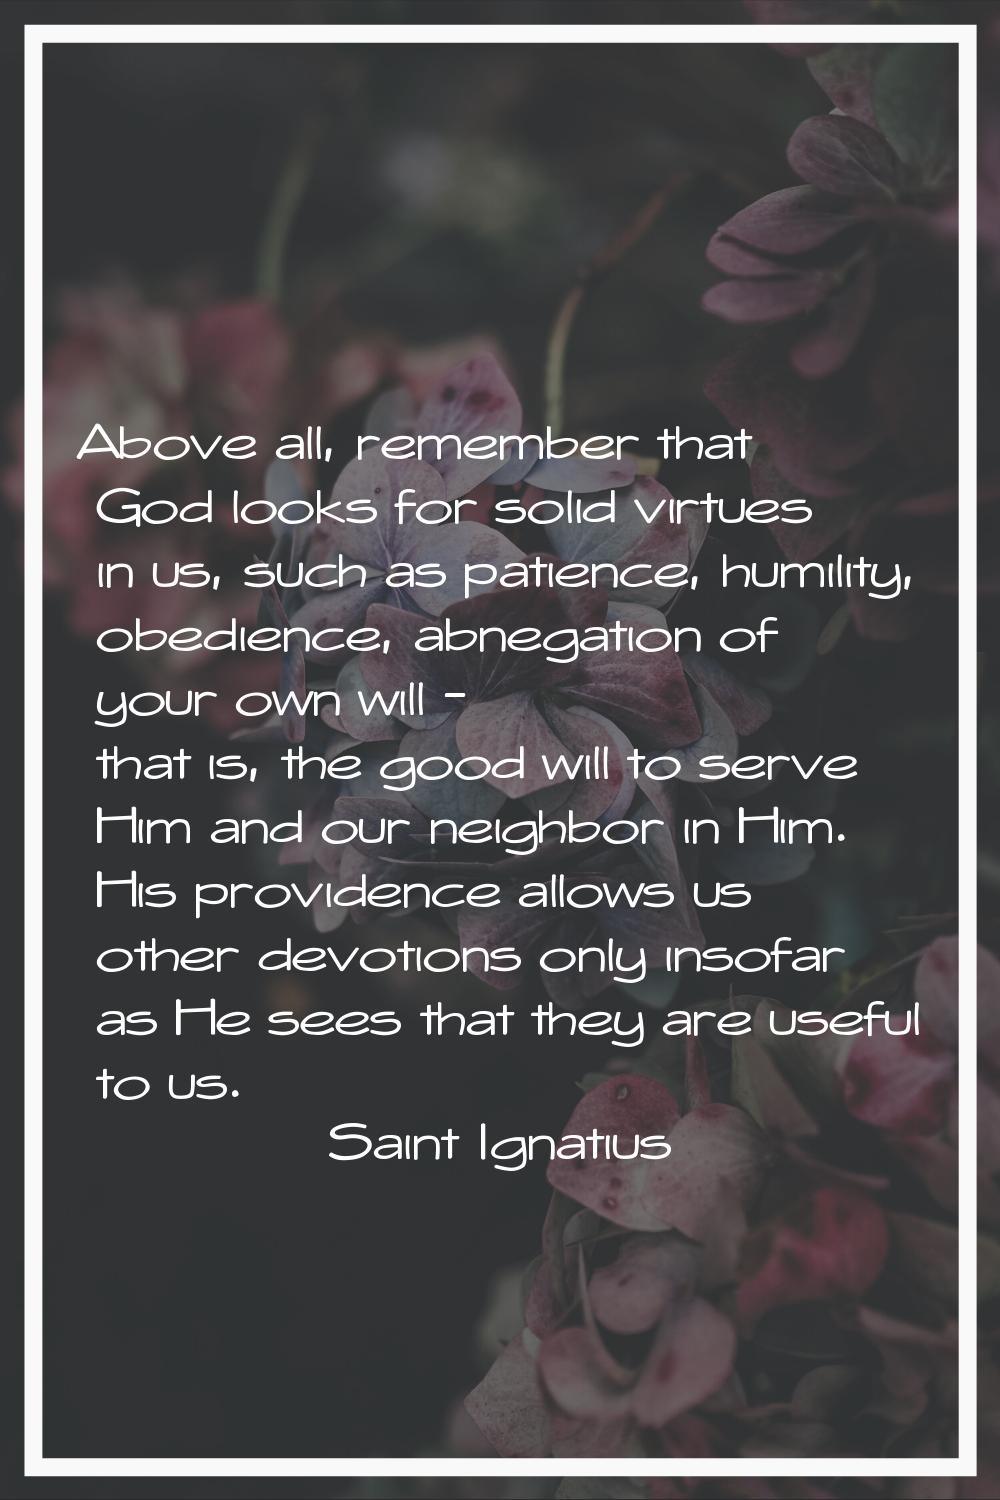 Above all, remember that God looks for solid virtues in us, such as patience, humility, obedience, 